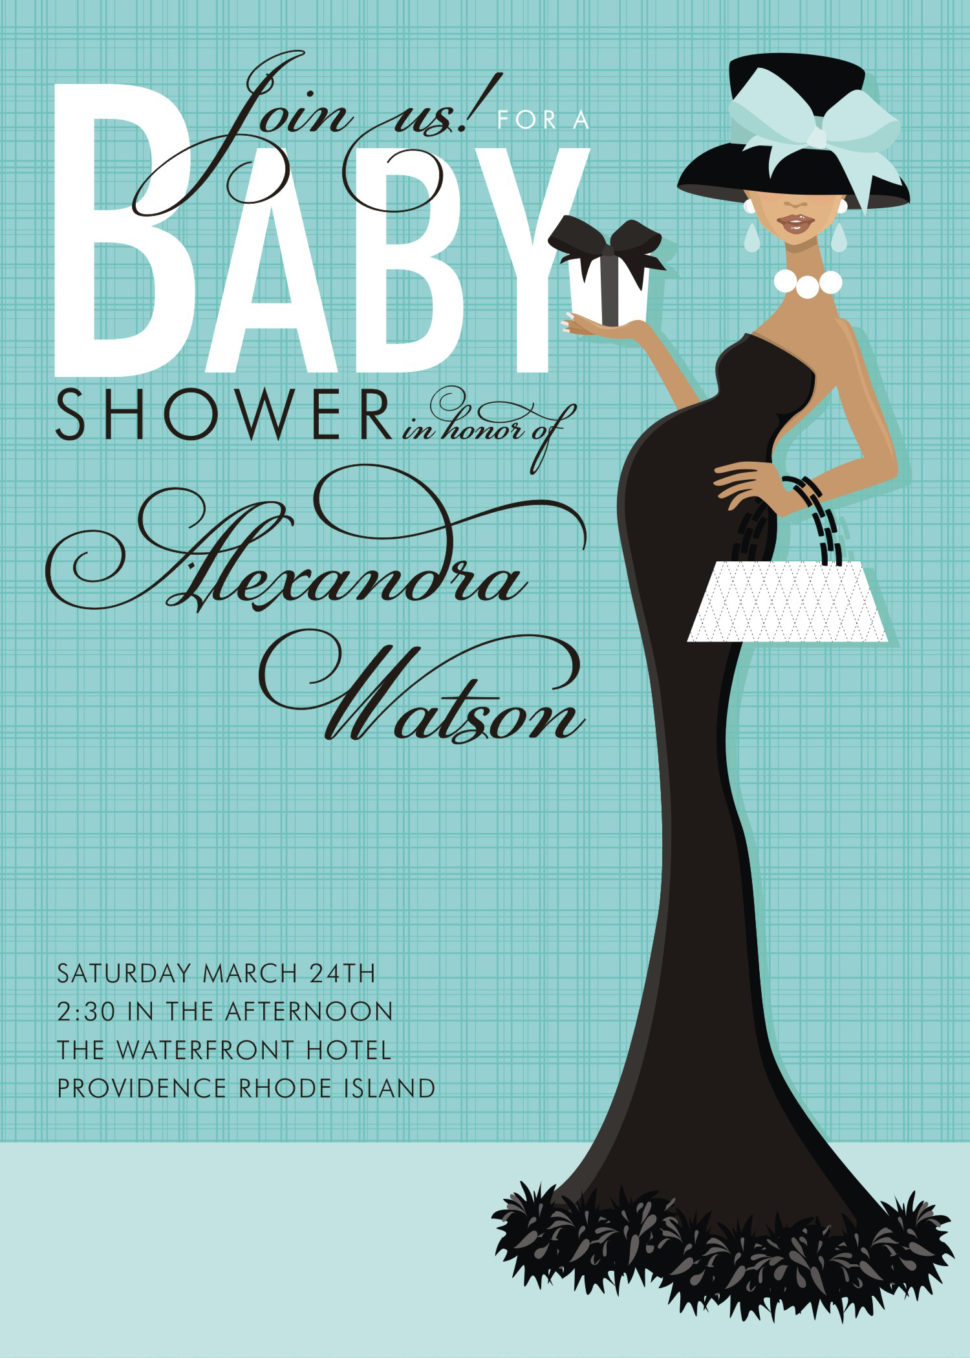 Medium Size of Baby Shower:sturdy Baby Shower Invitation Template Image Concepts Baby Shower Invitation Template As Well As Baby Shower Host With Baby Shower Stuff Plus Baby Shower Para Niño Together With Diy Baby Shower Invitations